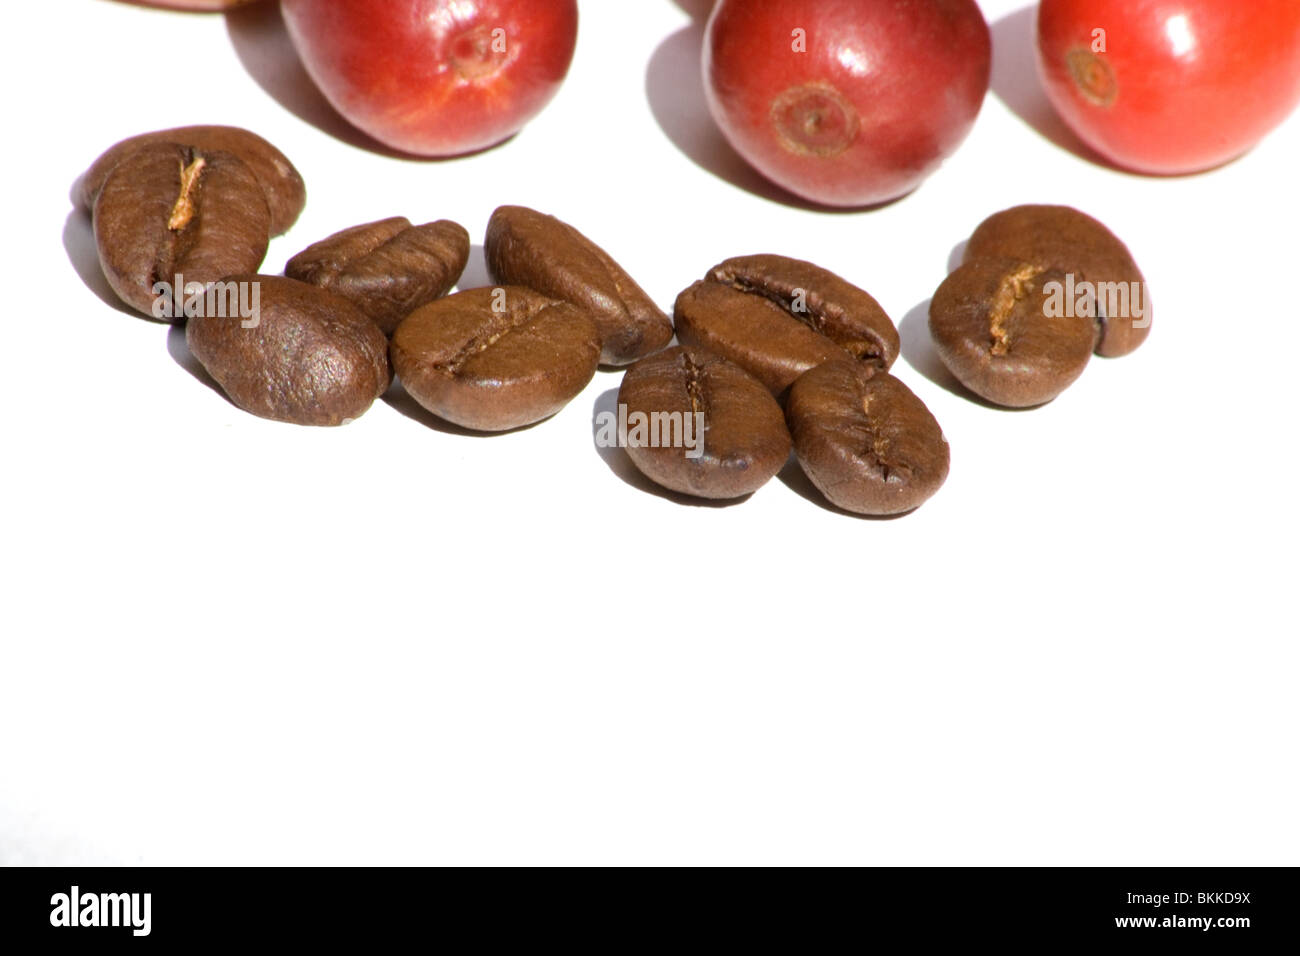 Close-up of fresh coffee cherries and roasted coffee beans Stock Photo